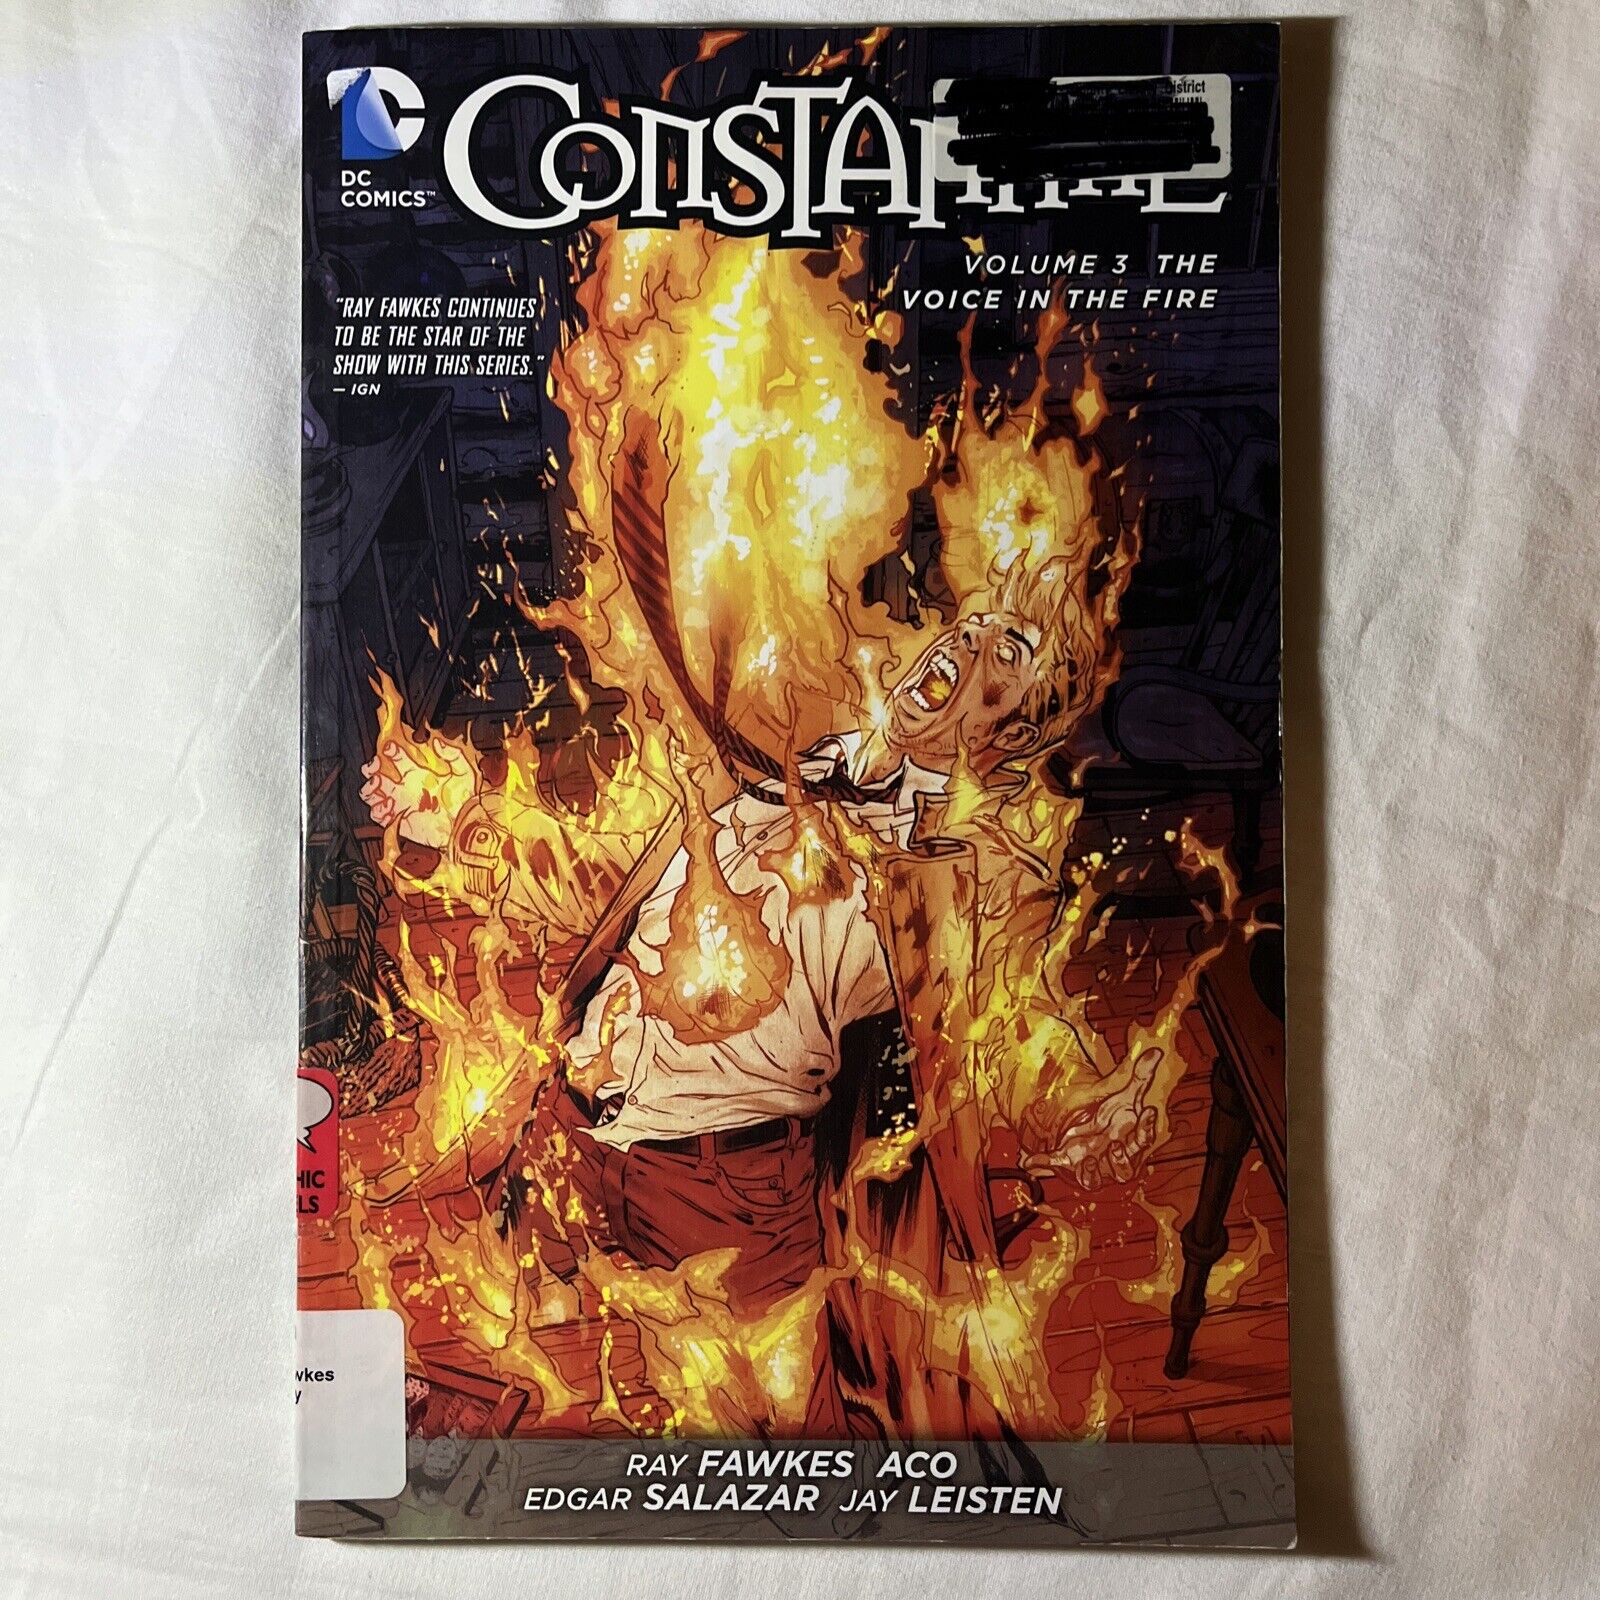 Constantine Vol. 3: The Voice in the Fire (the New 52) by Fawkes, Ray